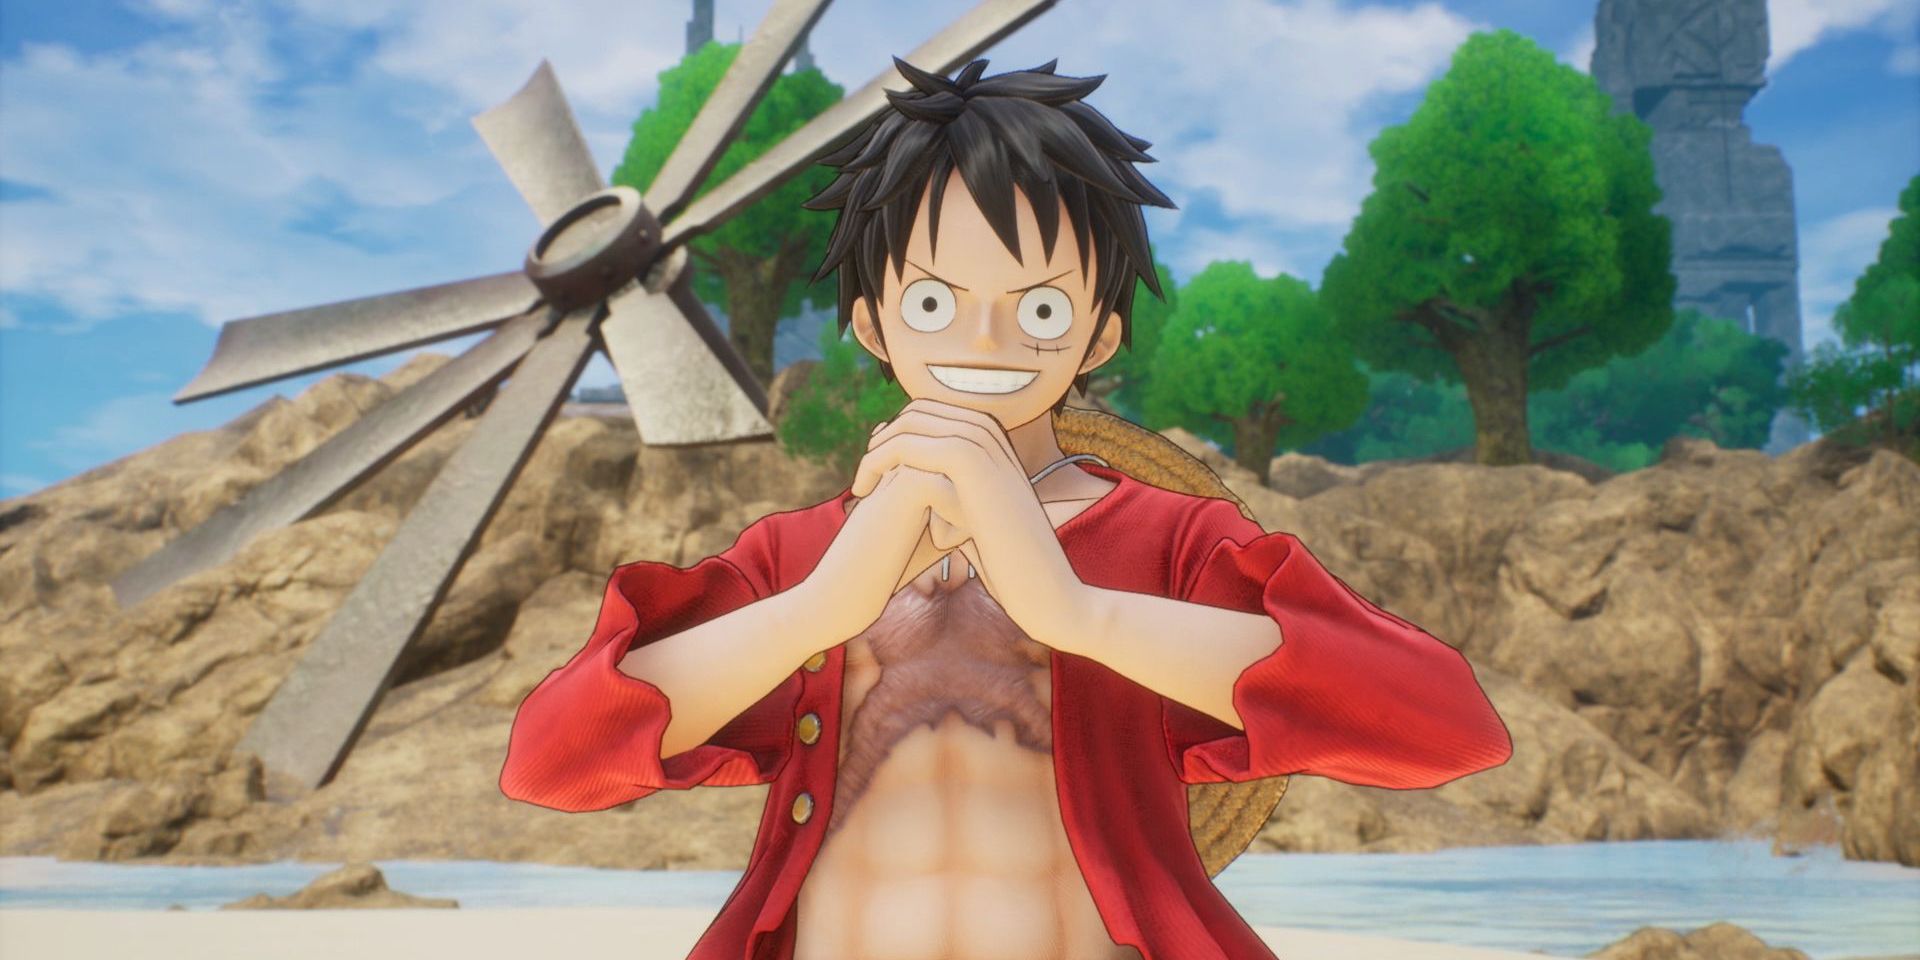 Monkey Luffy strikes a pose during an isolated story cutscene in One Piece Odyssey